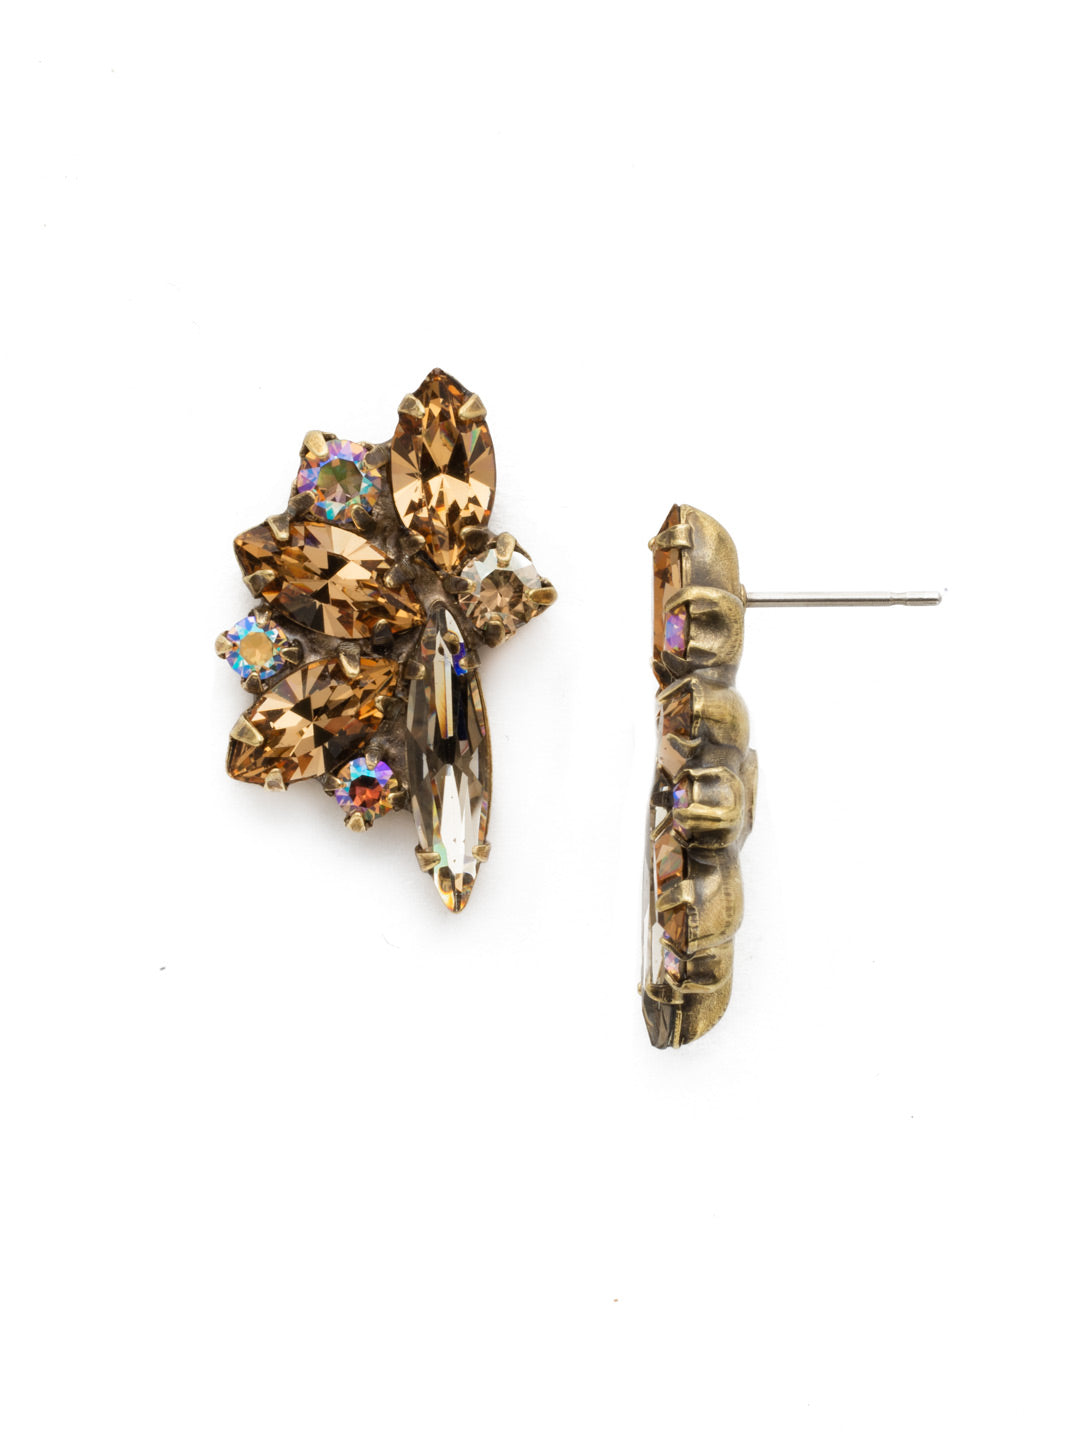 Fanned Vavette Stud Earrings - ECZ21AGNT - <p>Looking sharp! This post earring features a series of pointed navette crystals fanned out from a central round crystal. From Sorrelli's Neutral Territory collection in our Antique Gold-tone finish.</p>